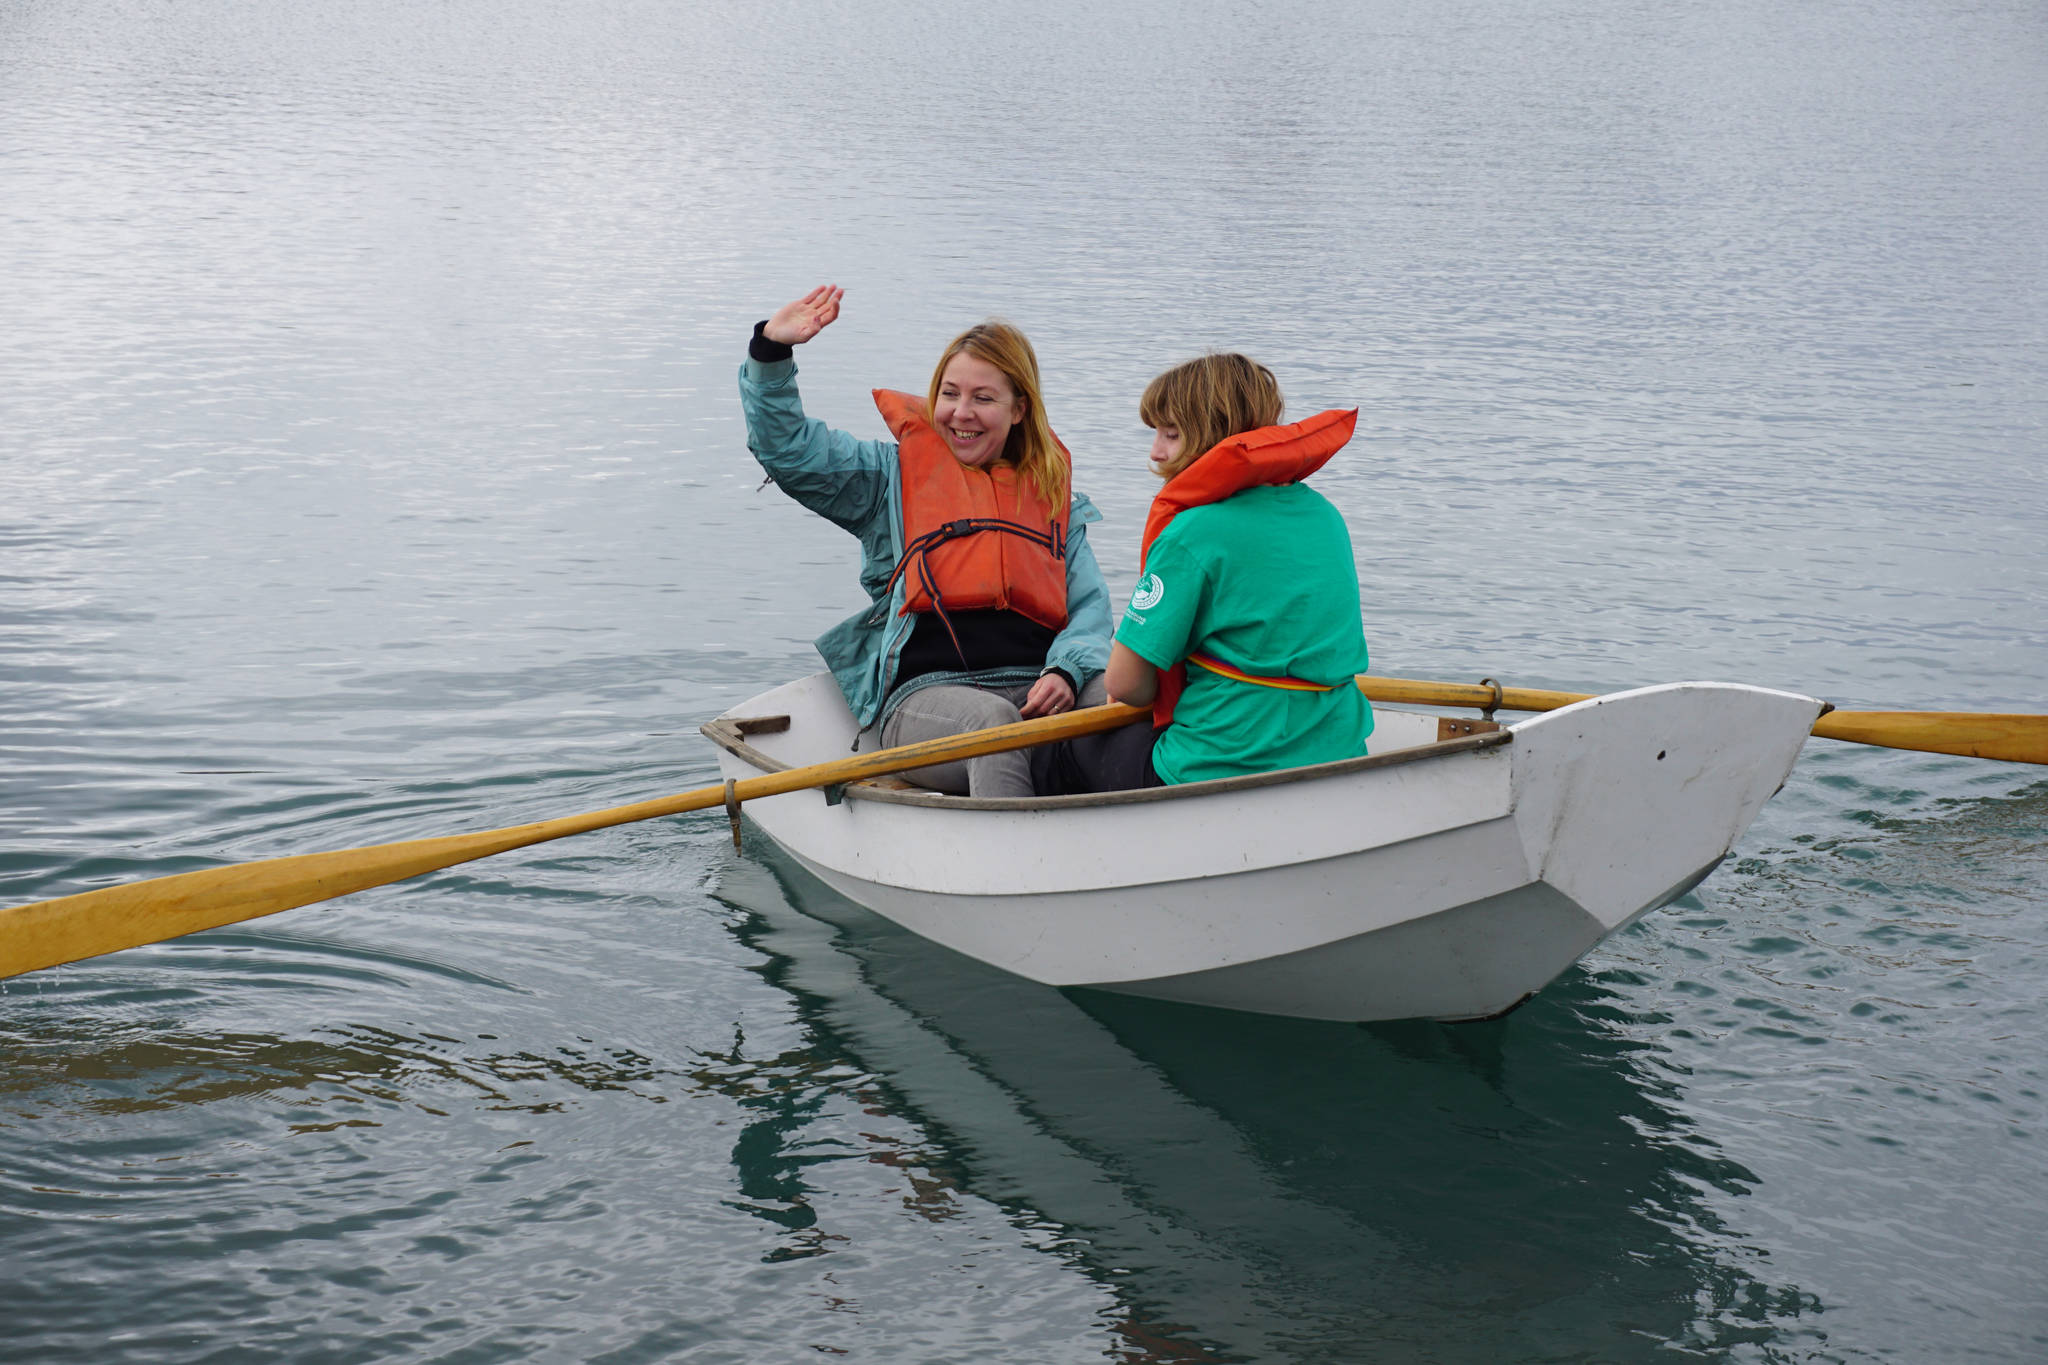 Jenya Anichenko waves as her daughter Tatiana Rogers rows a boat during the Kachemak Bay Wooden Boat Society Festival on Saturday, Sept. 2, 2017, at the Nick Dudiak Fishing Lagoon campground. (File photo by Michael Armstrong/Homer News)